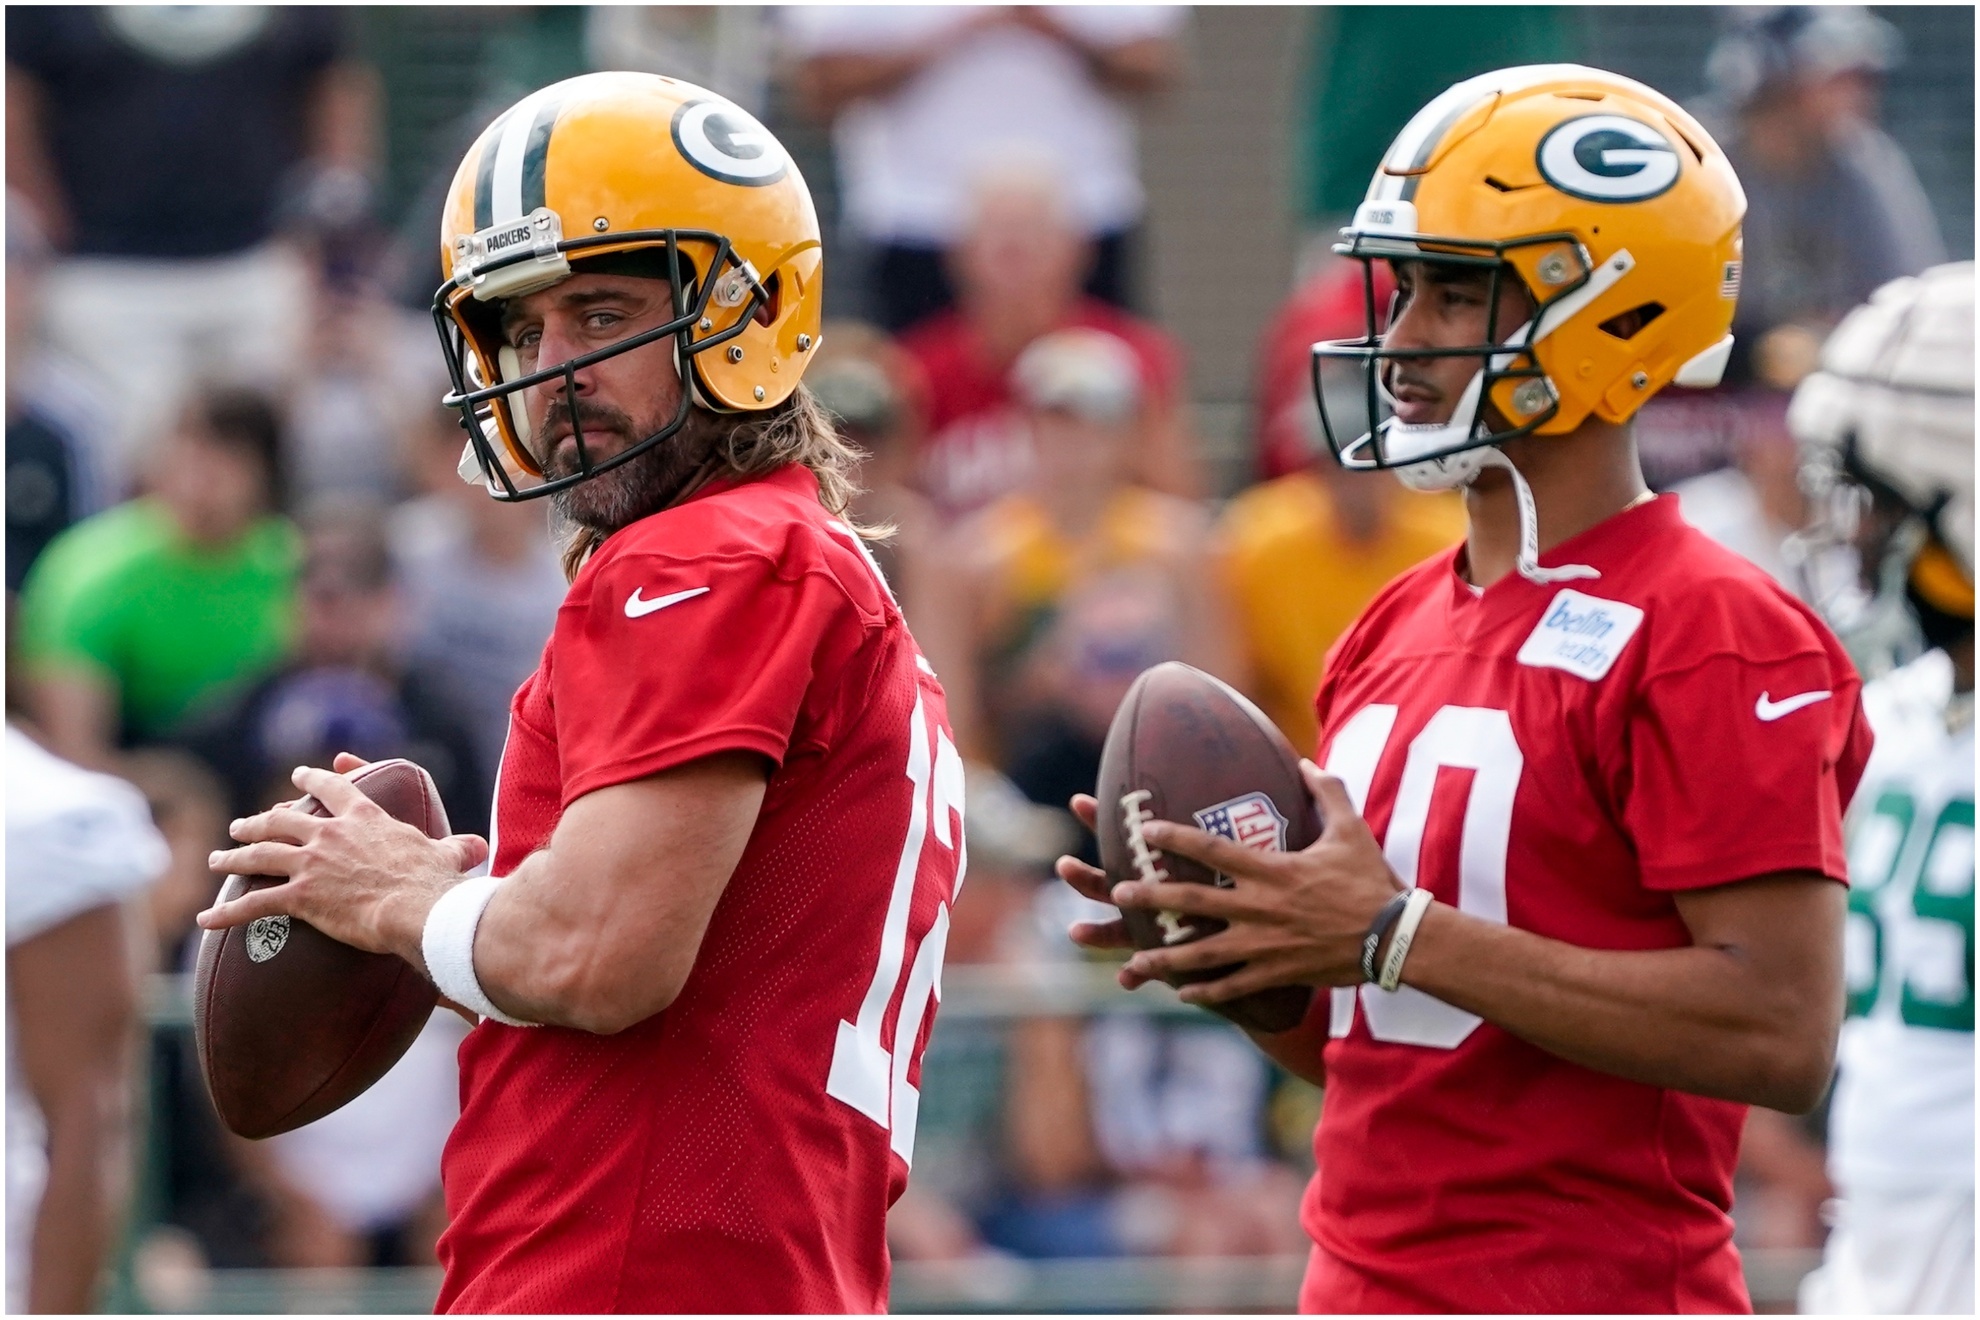 There's "no big difference" between Jordan Love and Aaron Rodgers, according to Romeo Doubs